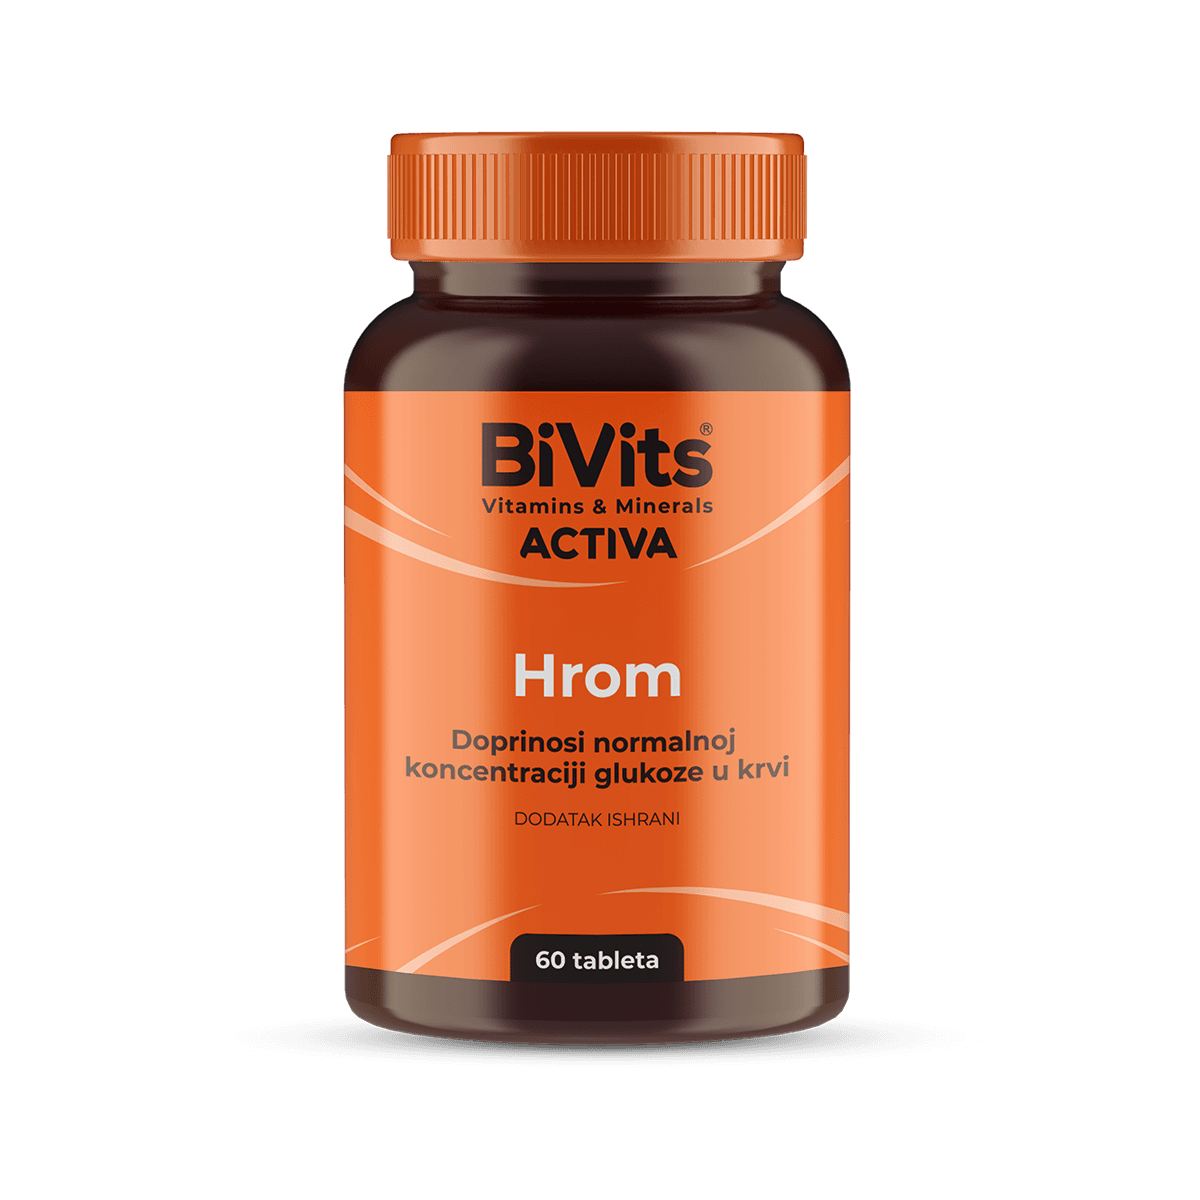 Selected image for BiVits ACTIVA vitamins&minerals Hrom